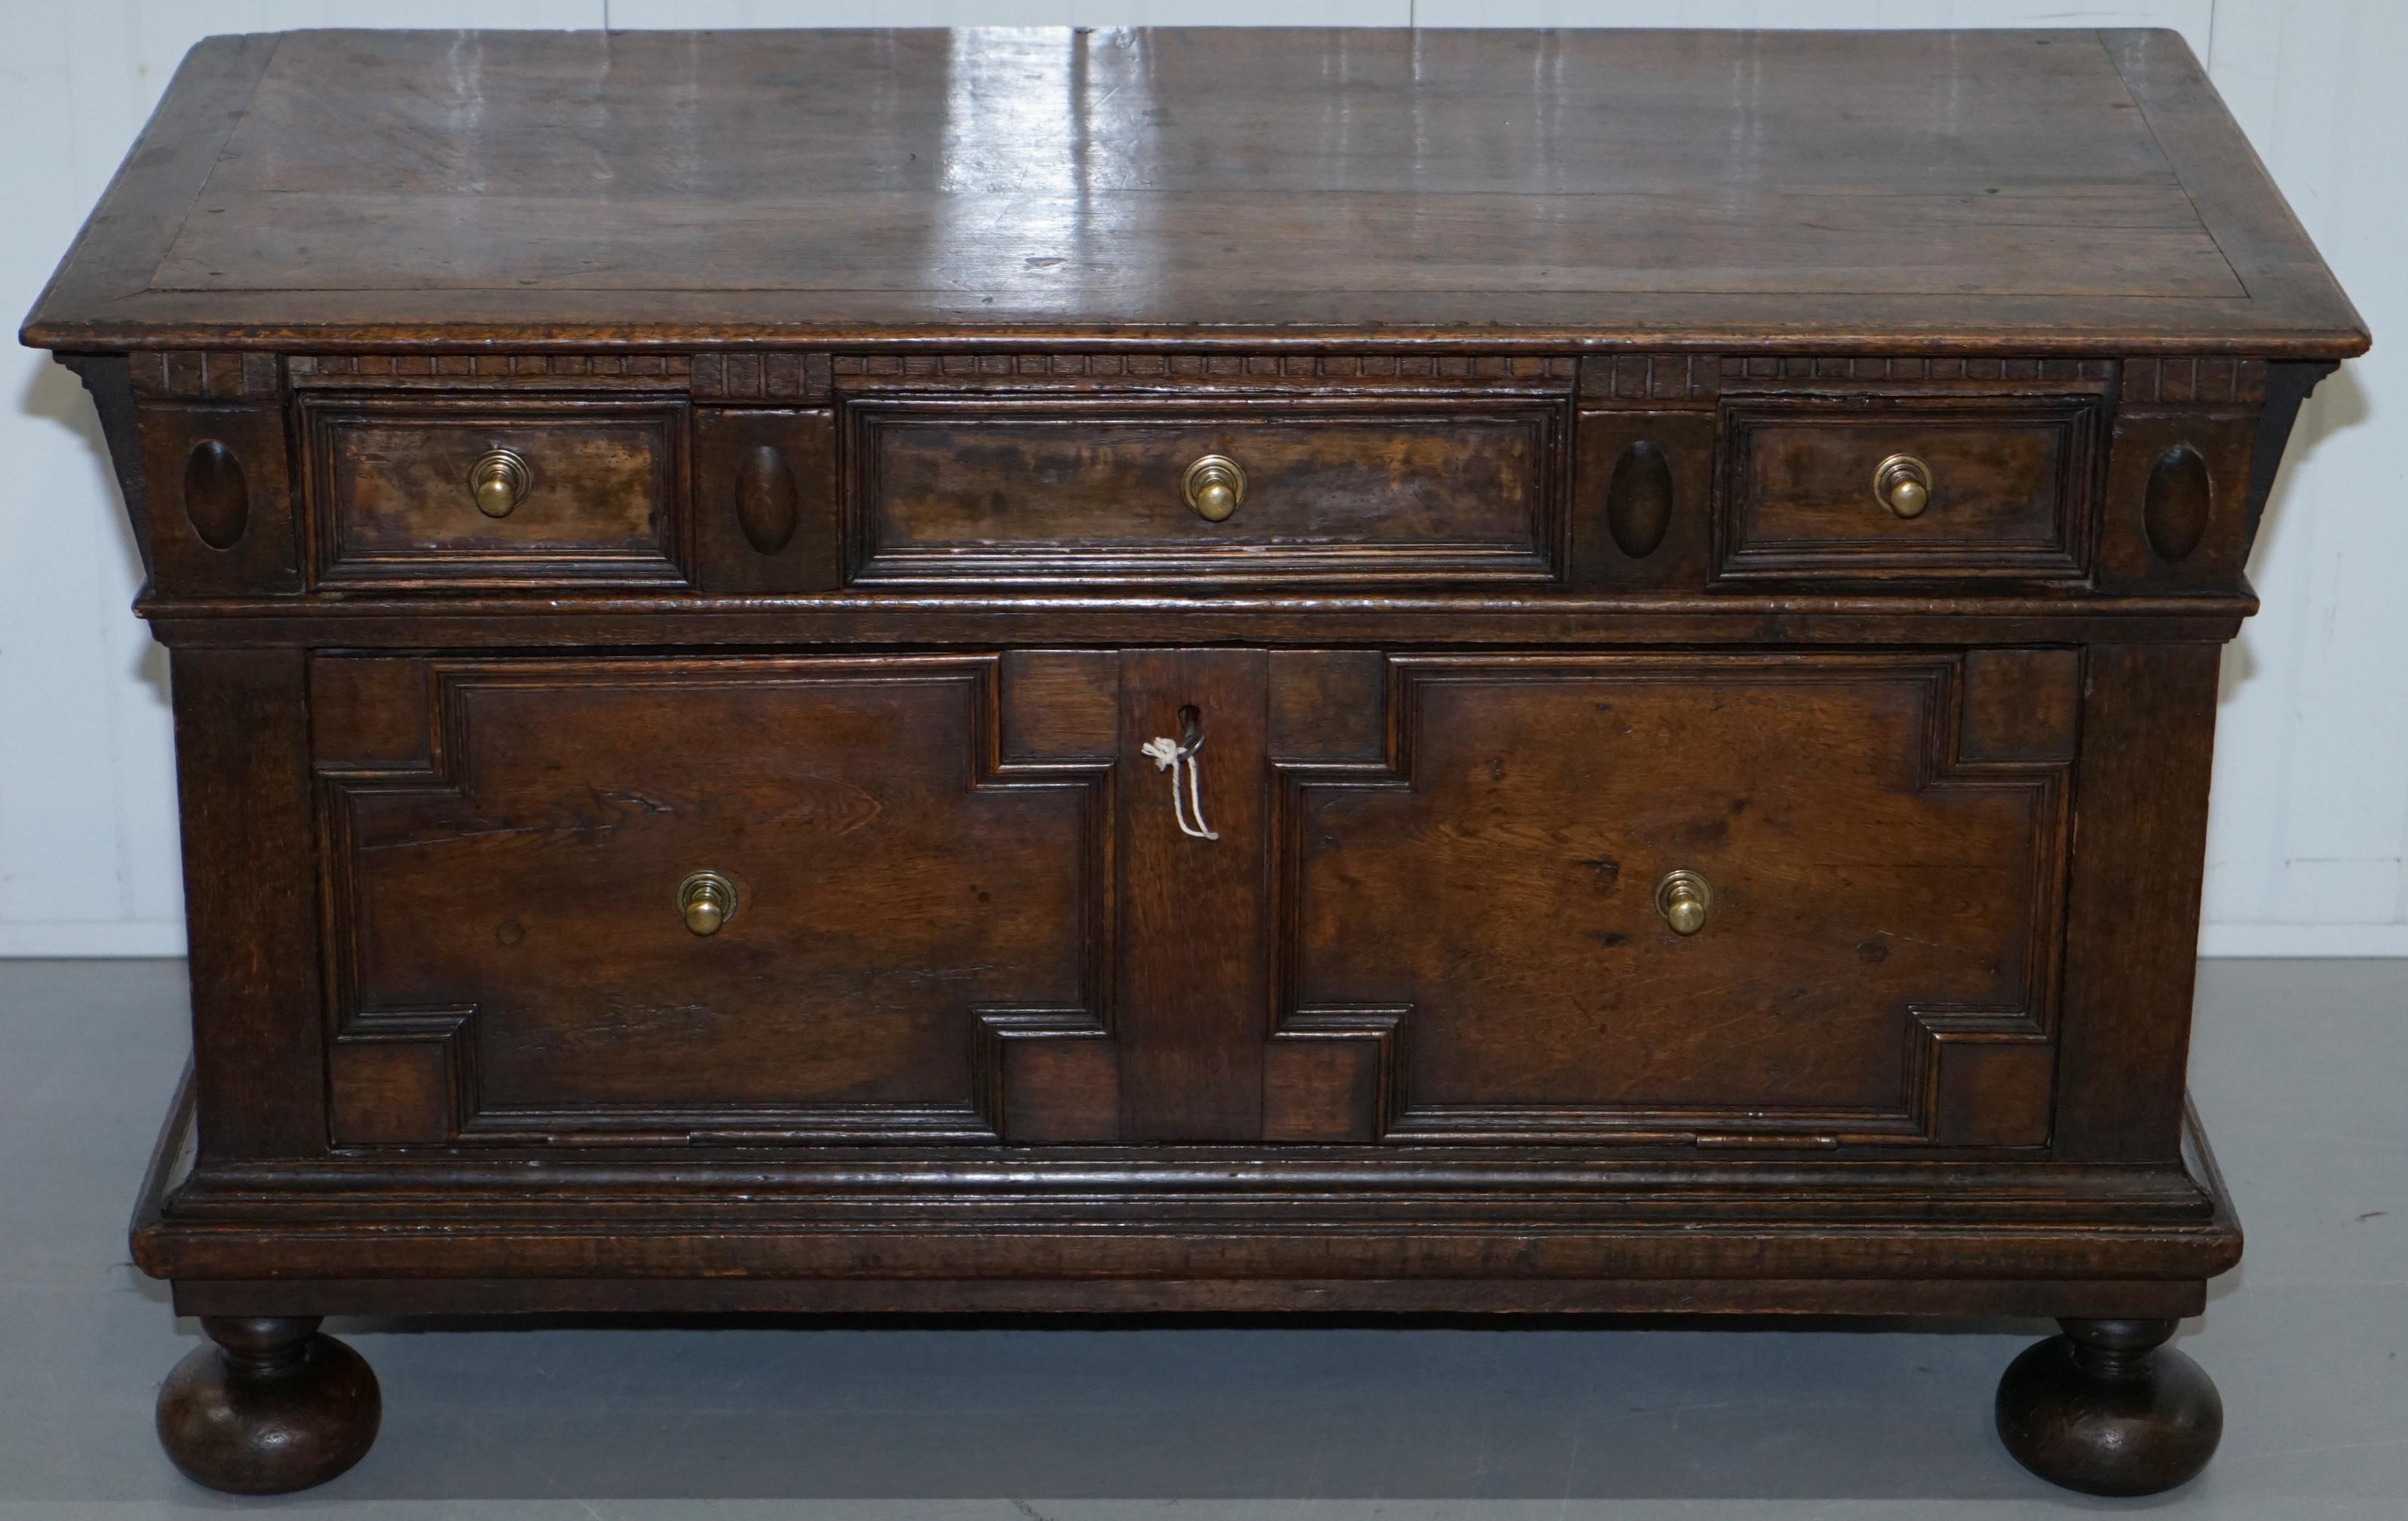 We are delighted to offer for sale this lovely circa 1600 Jacobean James VI trunk

A very good looking decorative and well-made piece, the trunk is hand sawn and made using early traditional furniture making techniques, you can see its all pegged